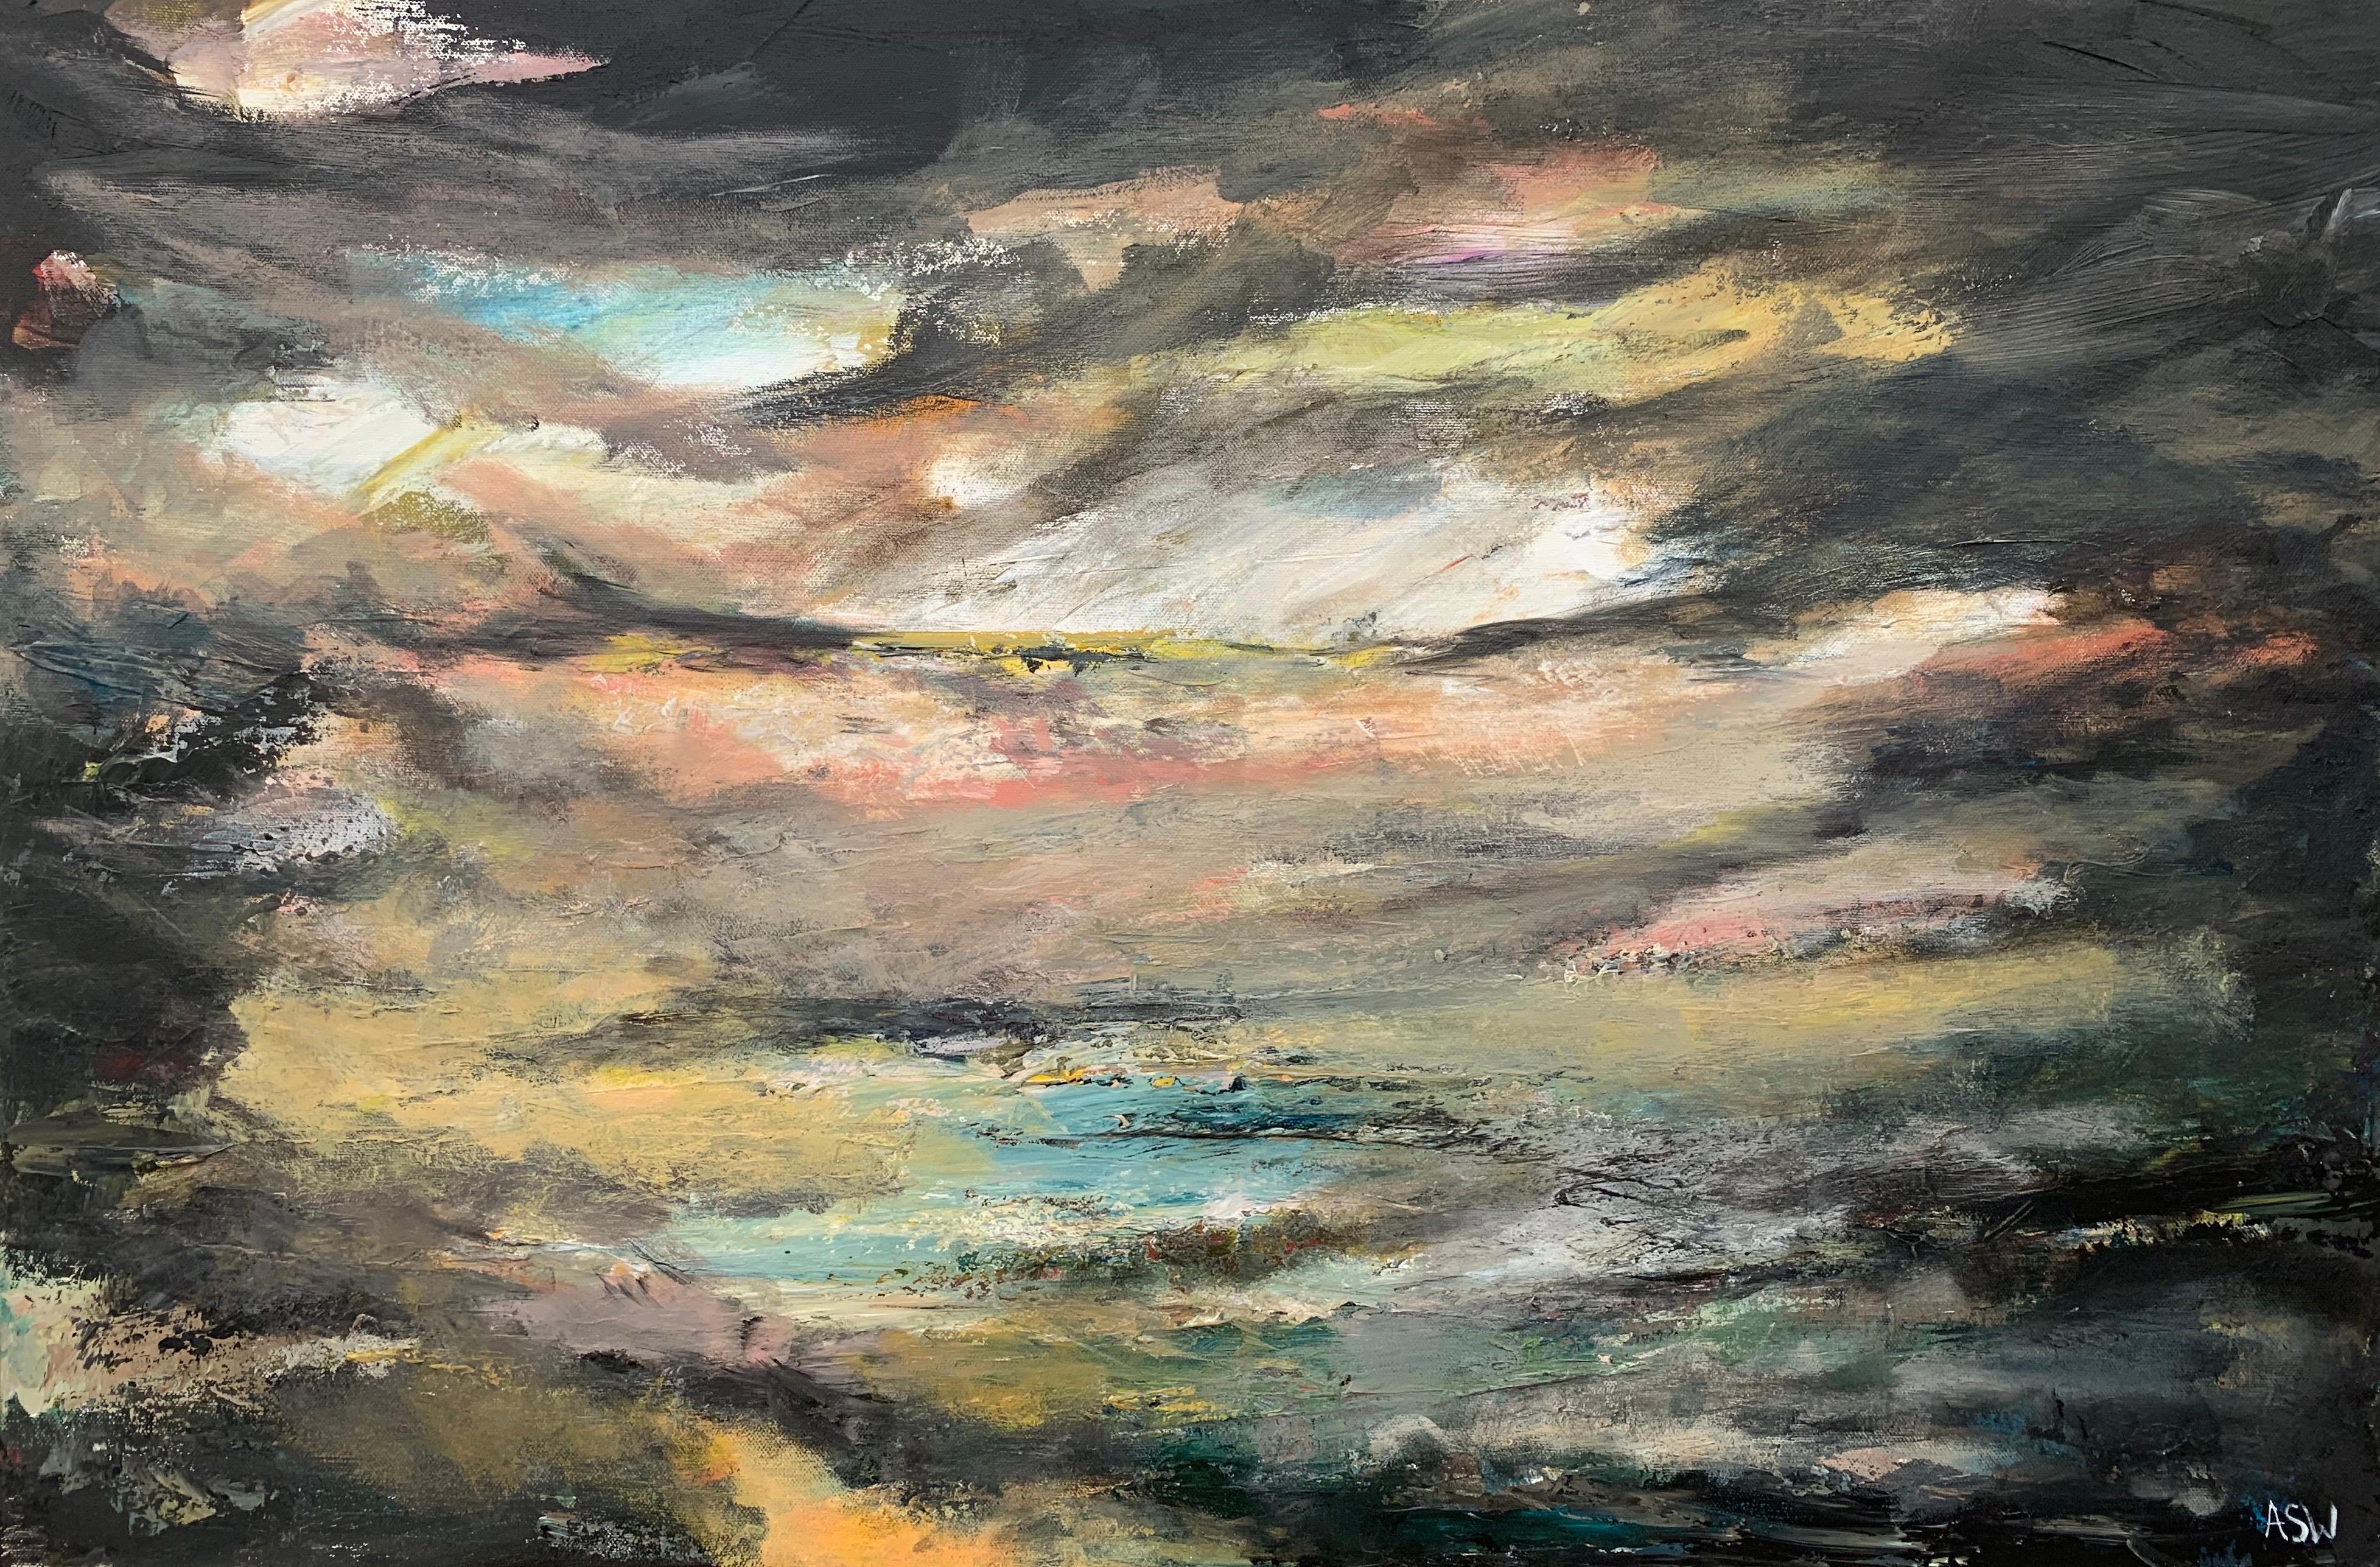 Dark Atmospheric Abstract Landscape Painting by Contemporary British Artist For Sale 6